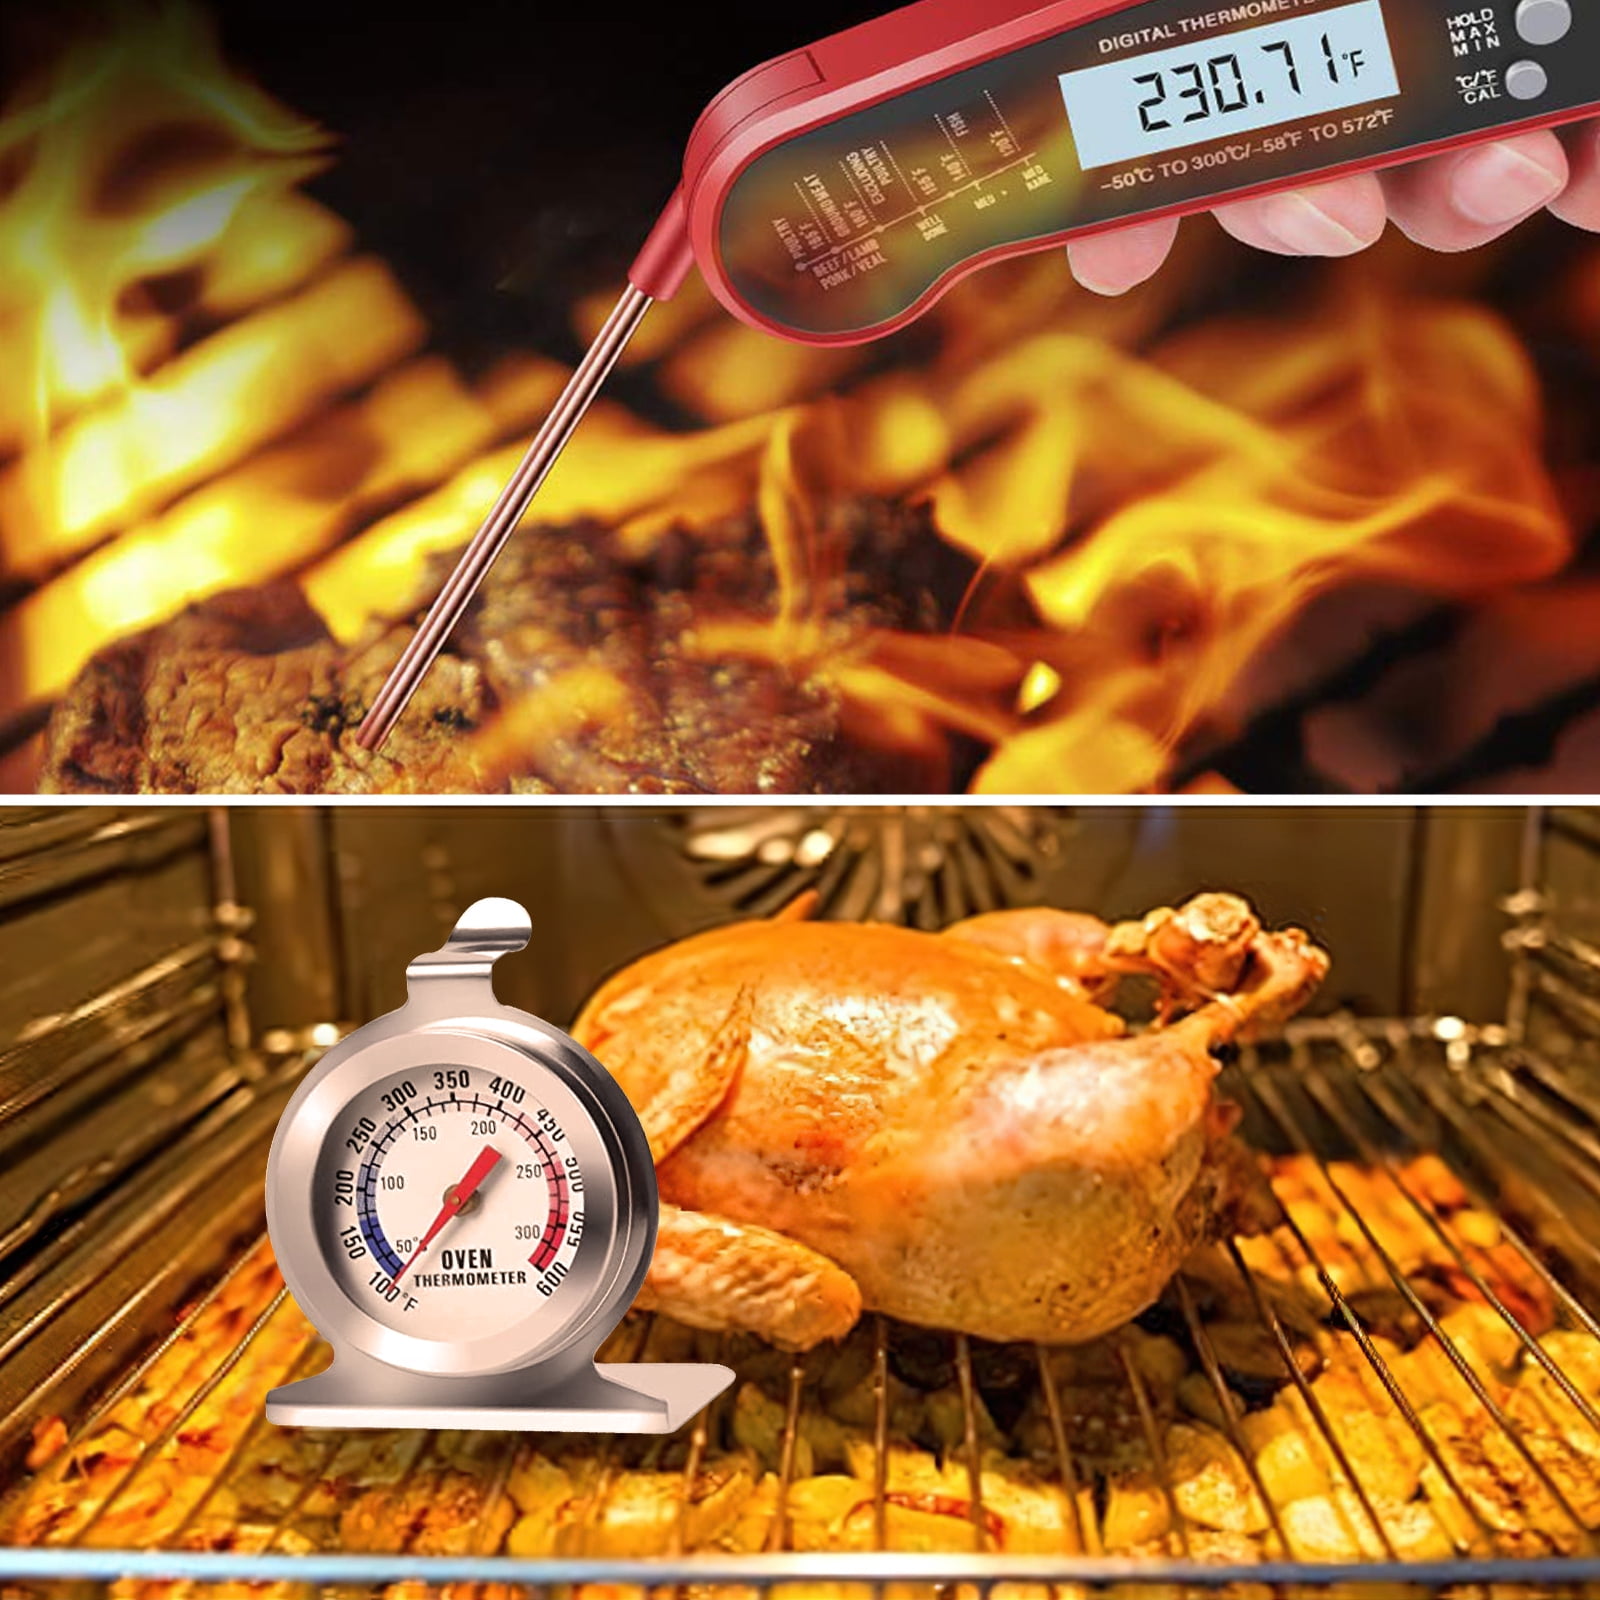 Genkent Digital Meat Thermometer Folding Probe Food Thermometer